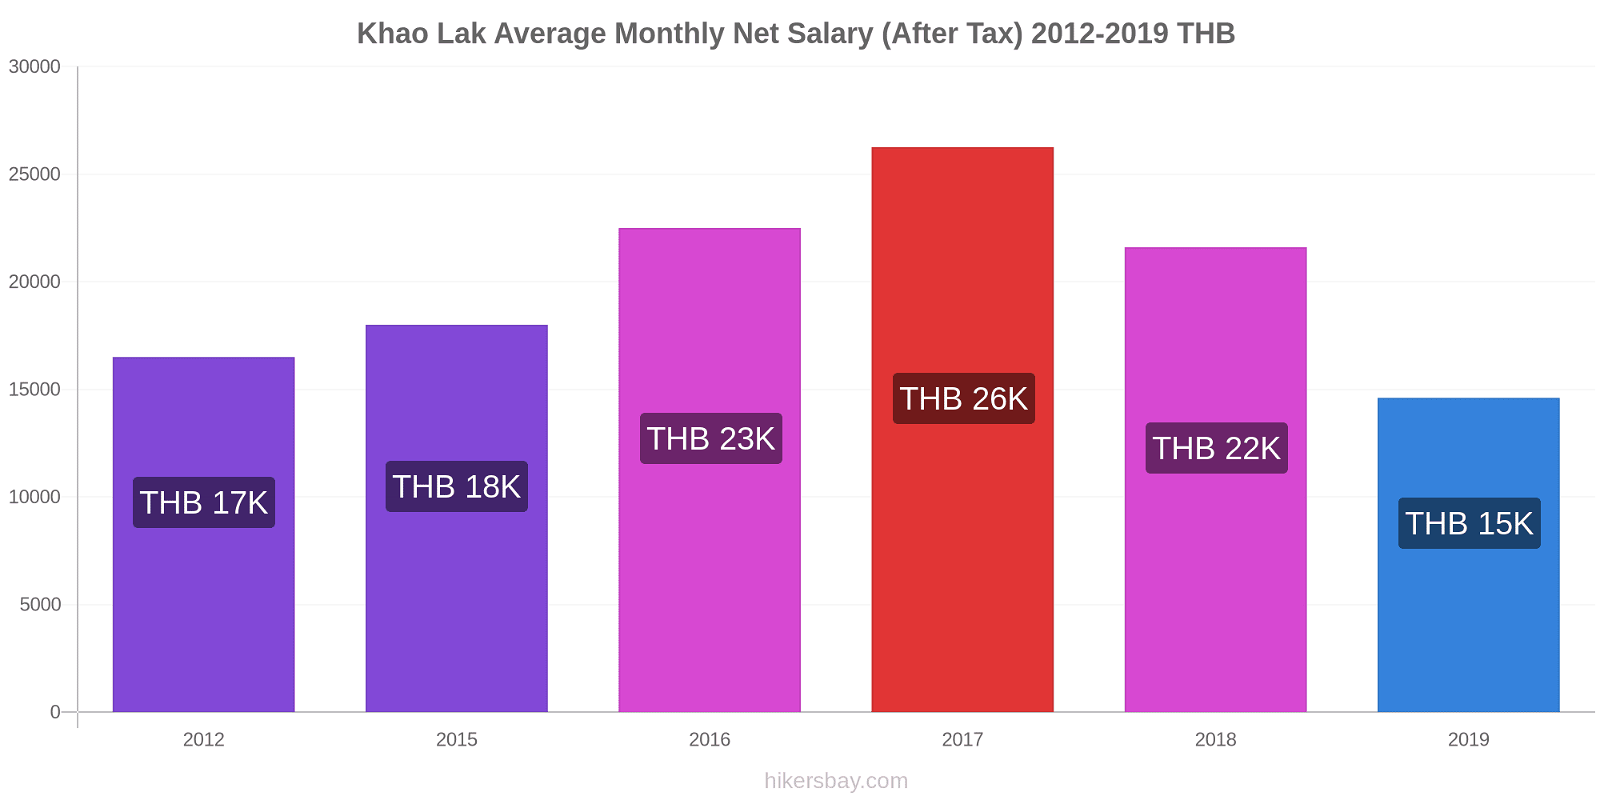 Khao Lak price changes Average Monthly Net Salary (After Tax) hikersbay.com